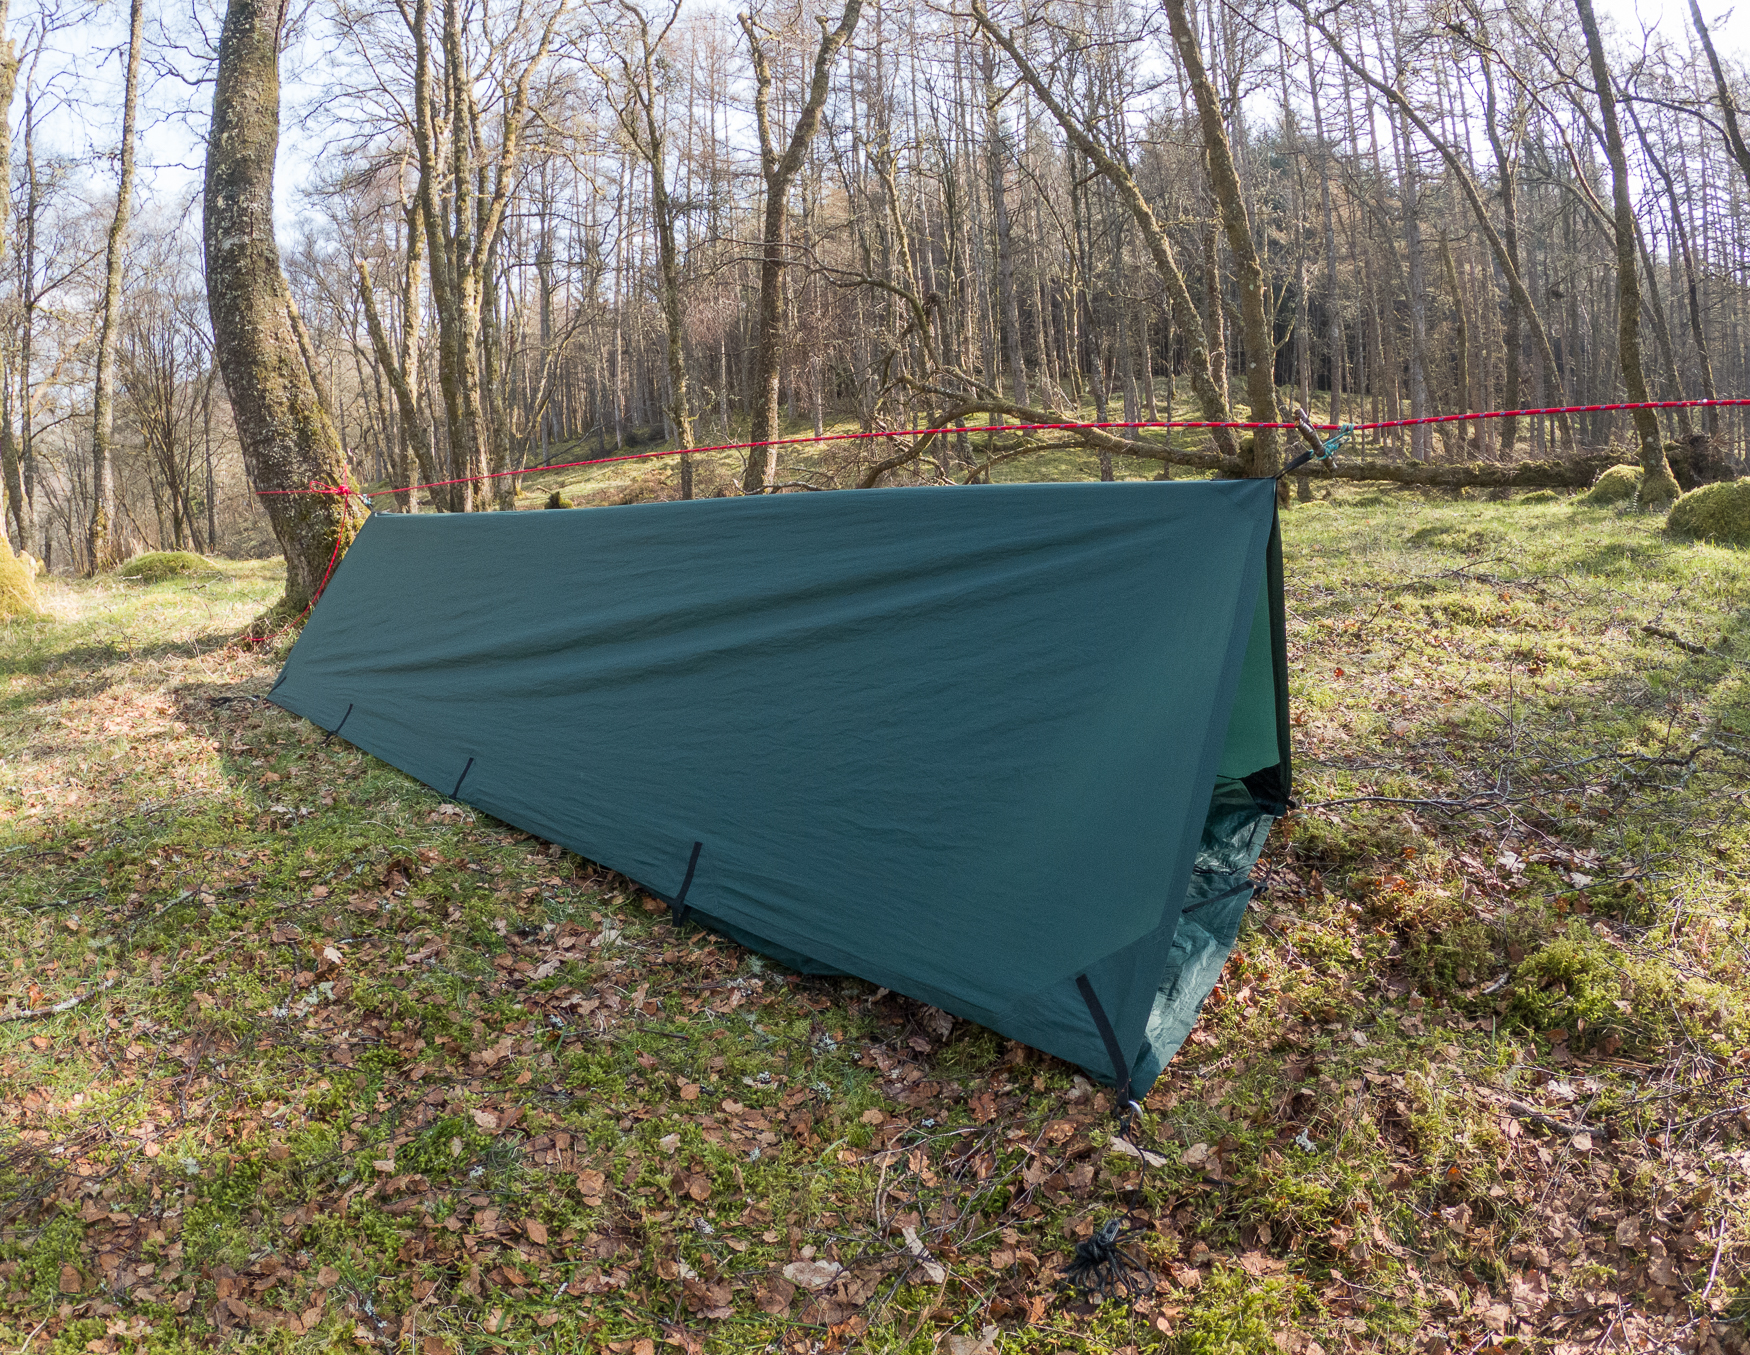 T Mos Geld lenende 5 creative ways to use your tarp to stay dry when camping this spring - The  Manual